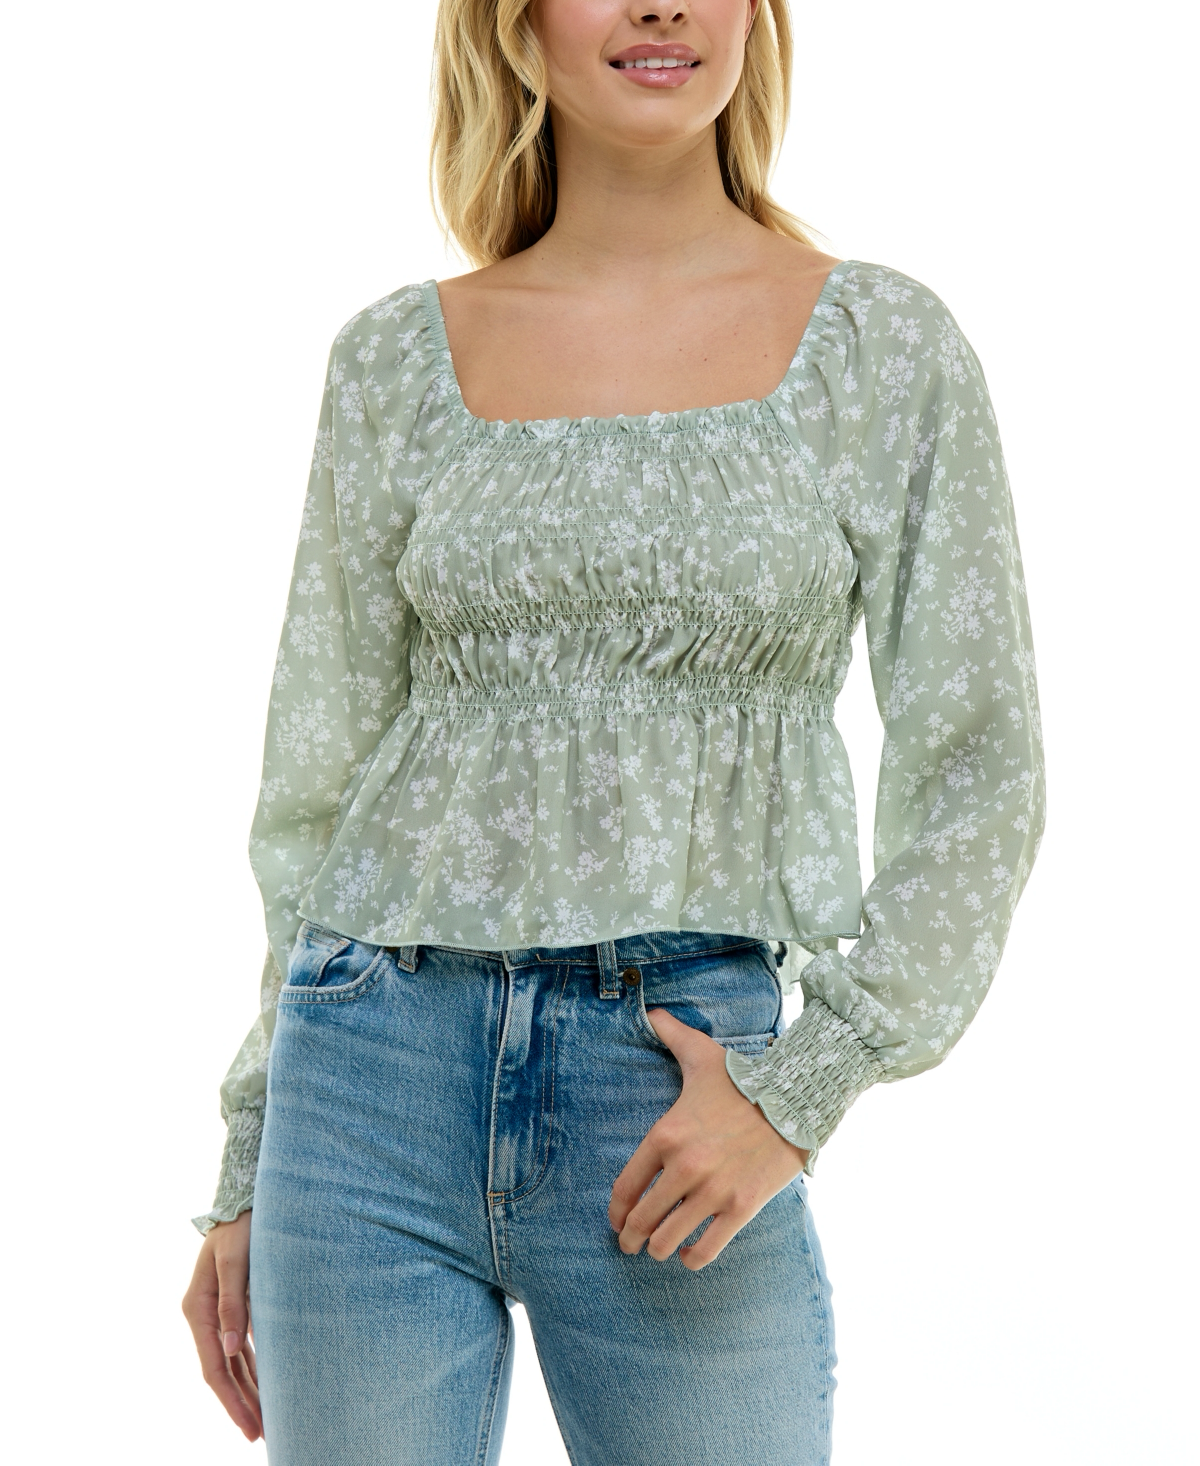 JUNIORS' SMOCKED PEPLUM TOP IN DESERT SAGE Boho-inspiration abounds in this juniors' peplum top from Ultra Flirt. Looks fab with jeans and sandals. Juniors Juniors' Clothing - Tops